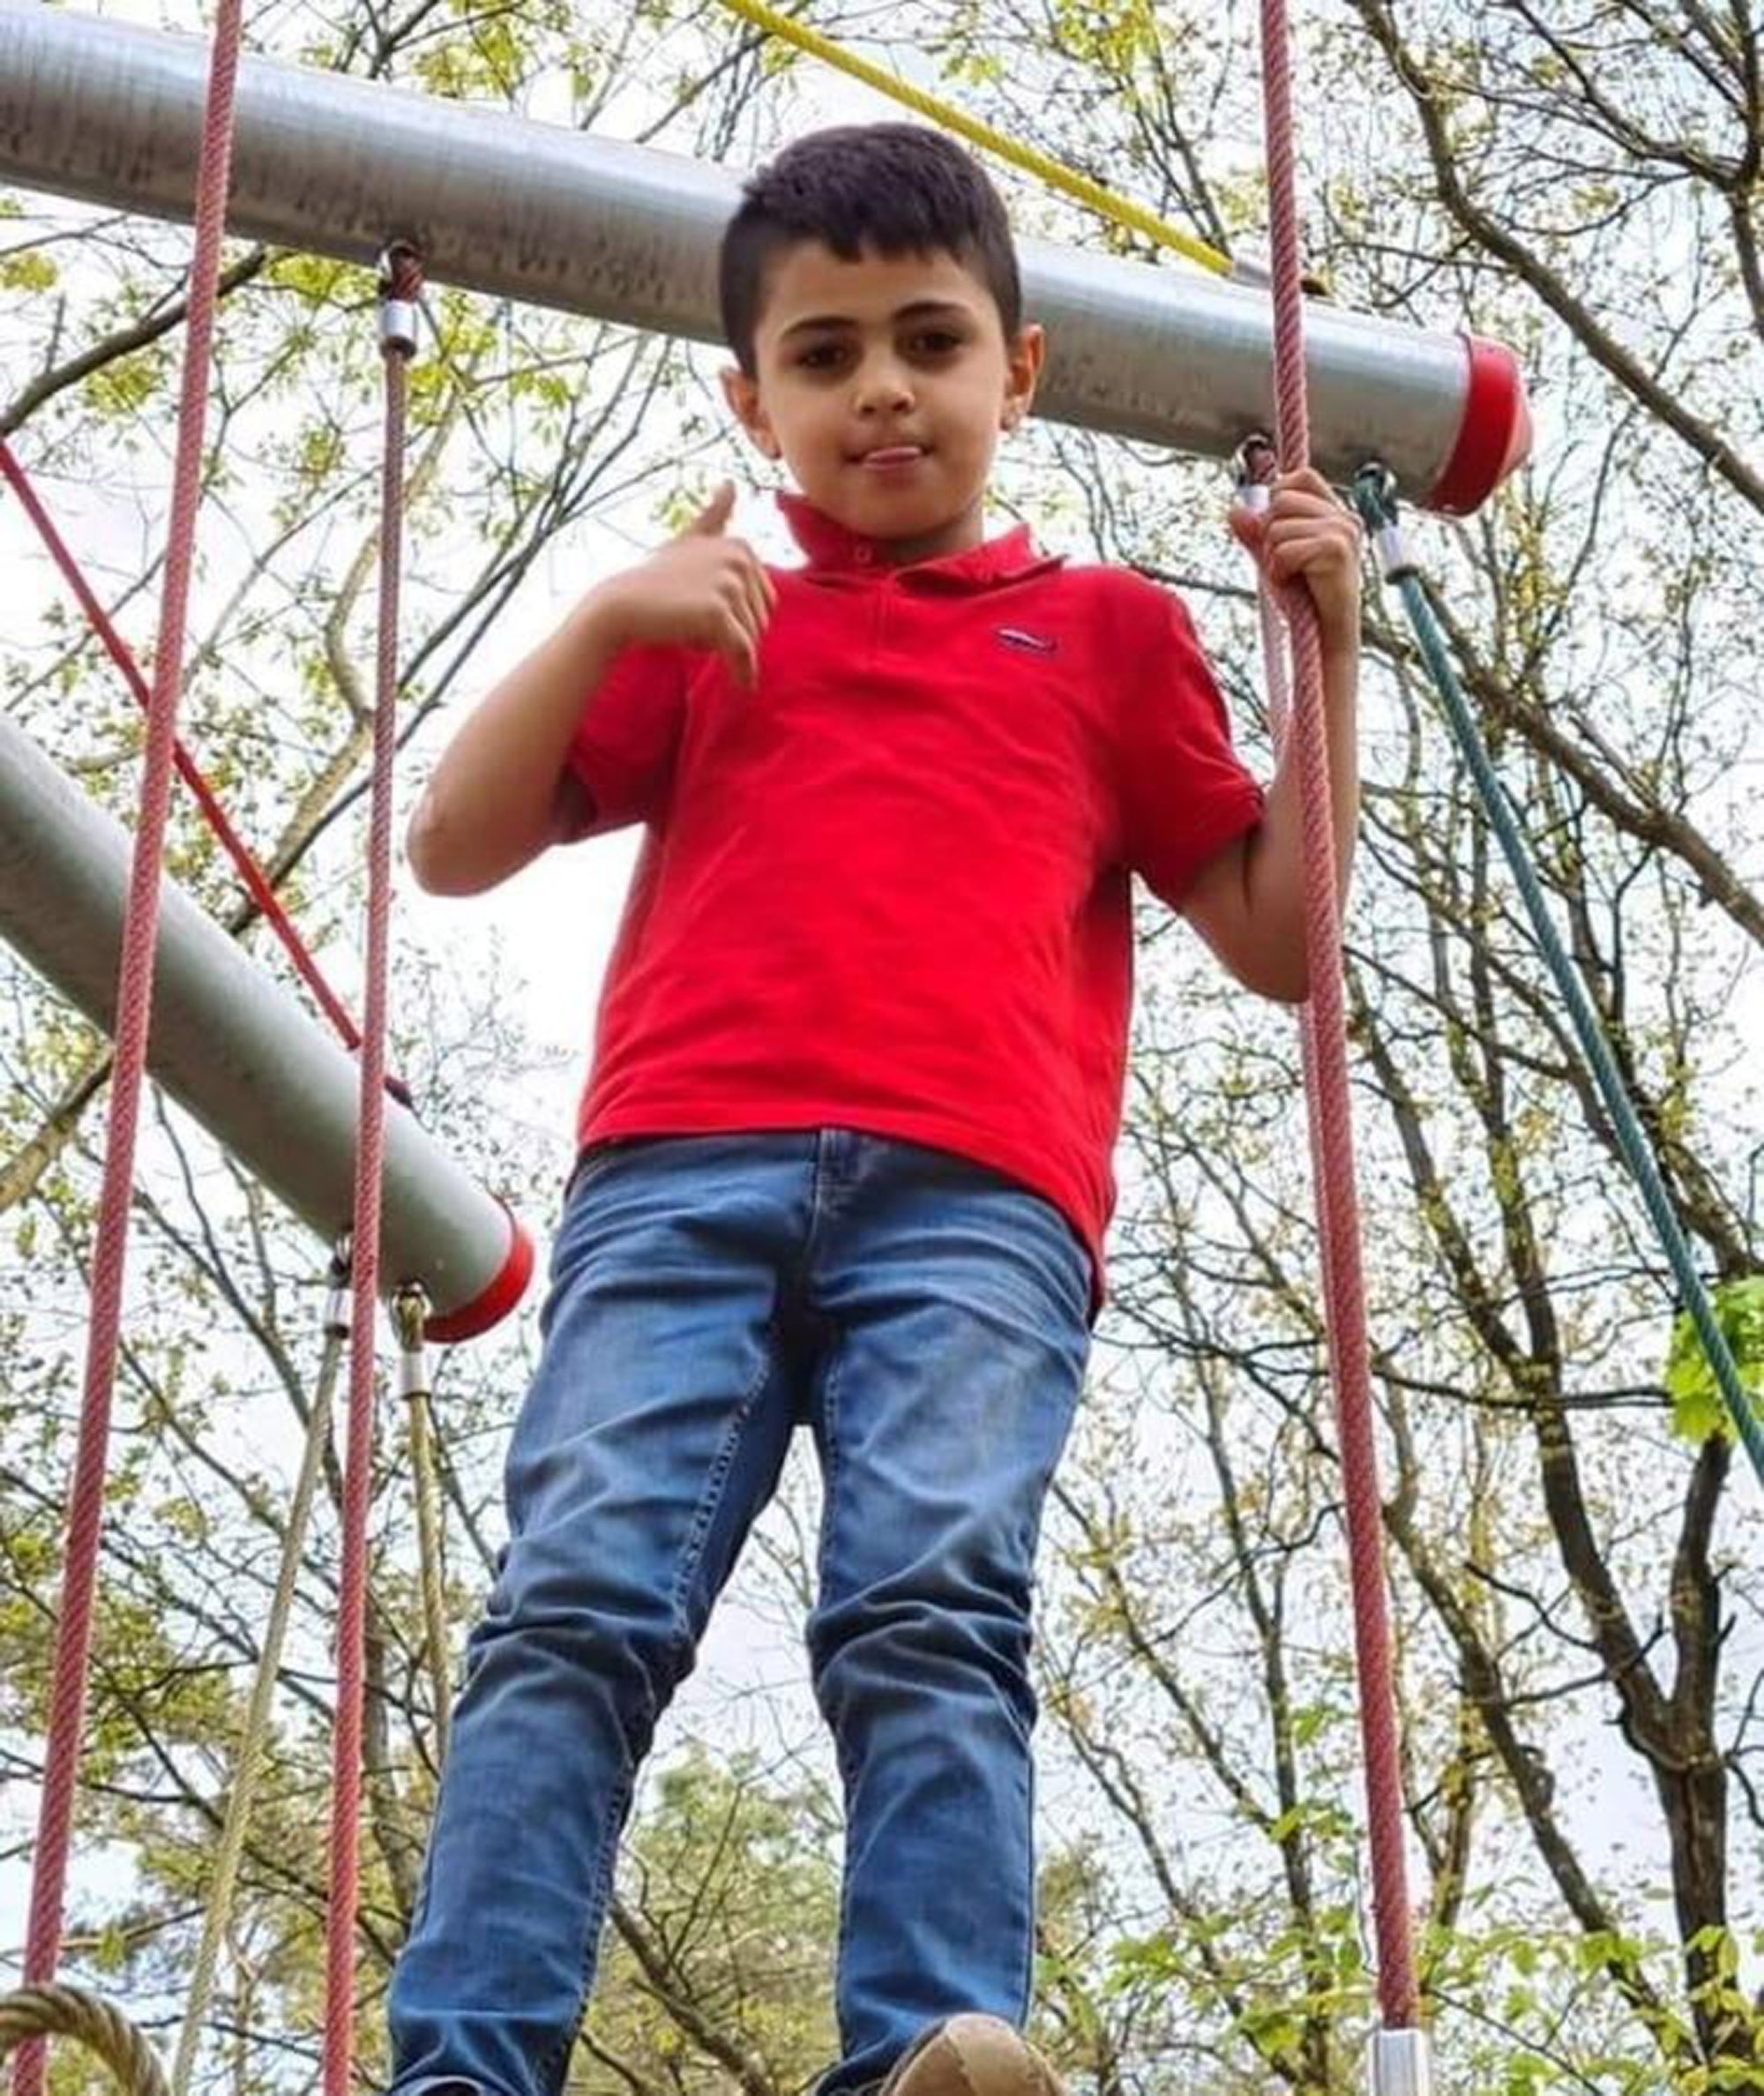 Read more about the article Syrian Boy, 8, Drowns In German Lake While On Holiday With Family